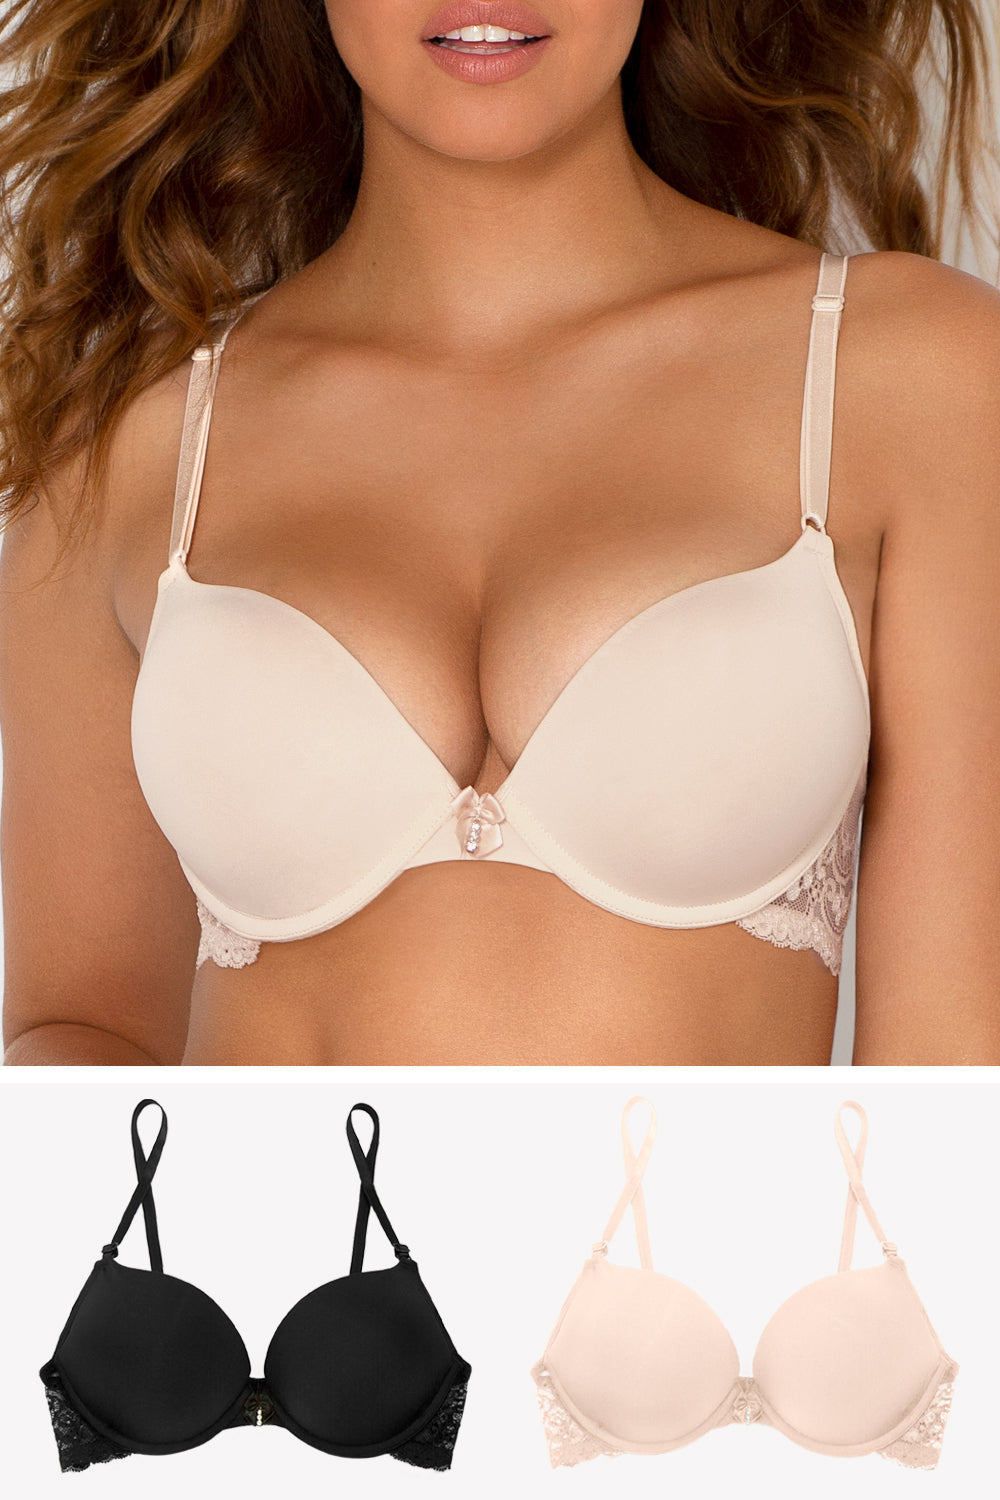 Add 2 Cup Sizes Push-Up Bra 2 Pack | In The Buff/Black Hue W Lace Wings